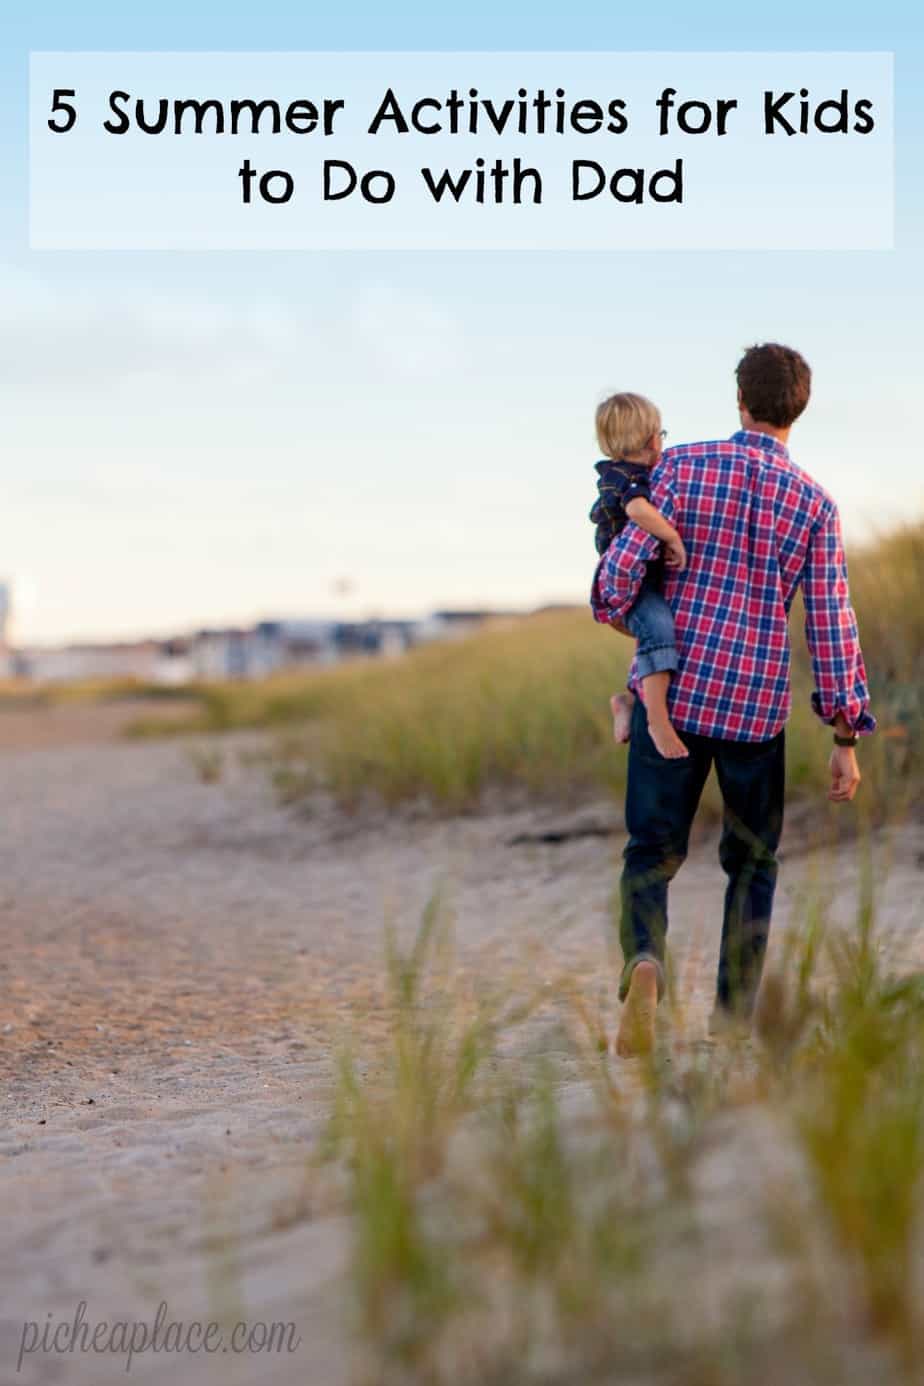 Father’s Day comes at the perfect time of year – during the summer when there are so many great activities your children can enjoy with Dad. What are some summer activities your children like to do with Dad? | 5 Summer Activities for Kids to Do with Dad